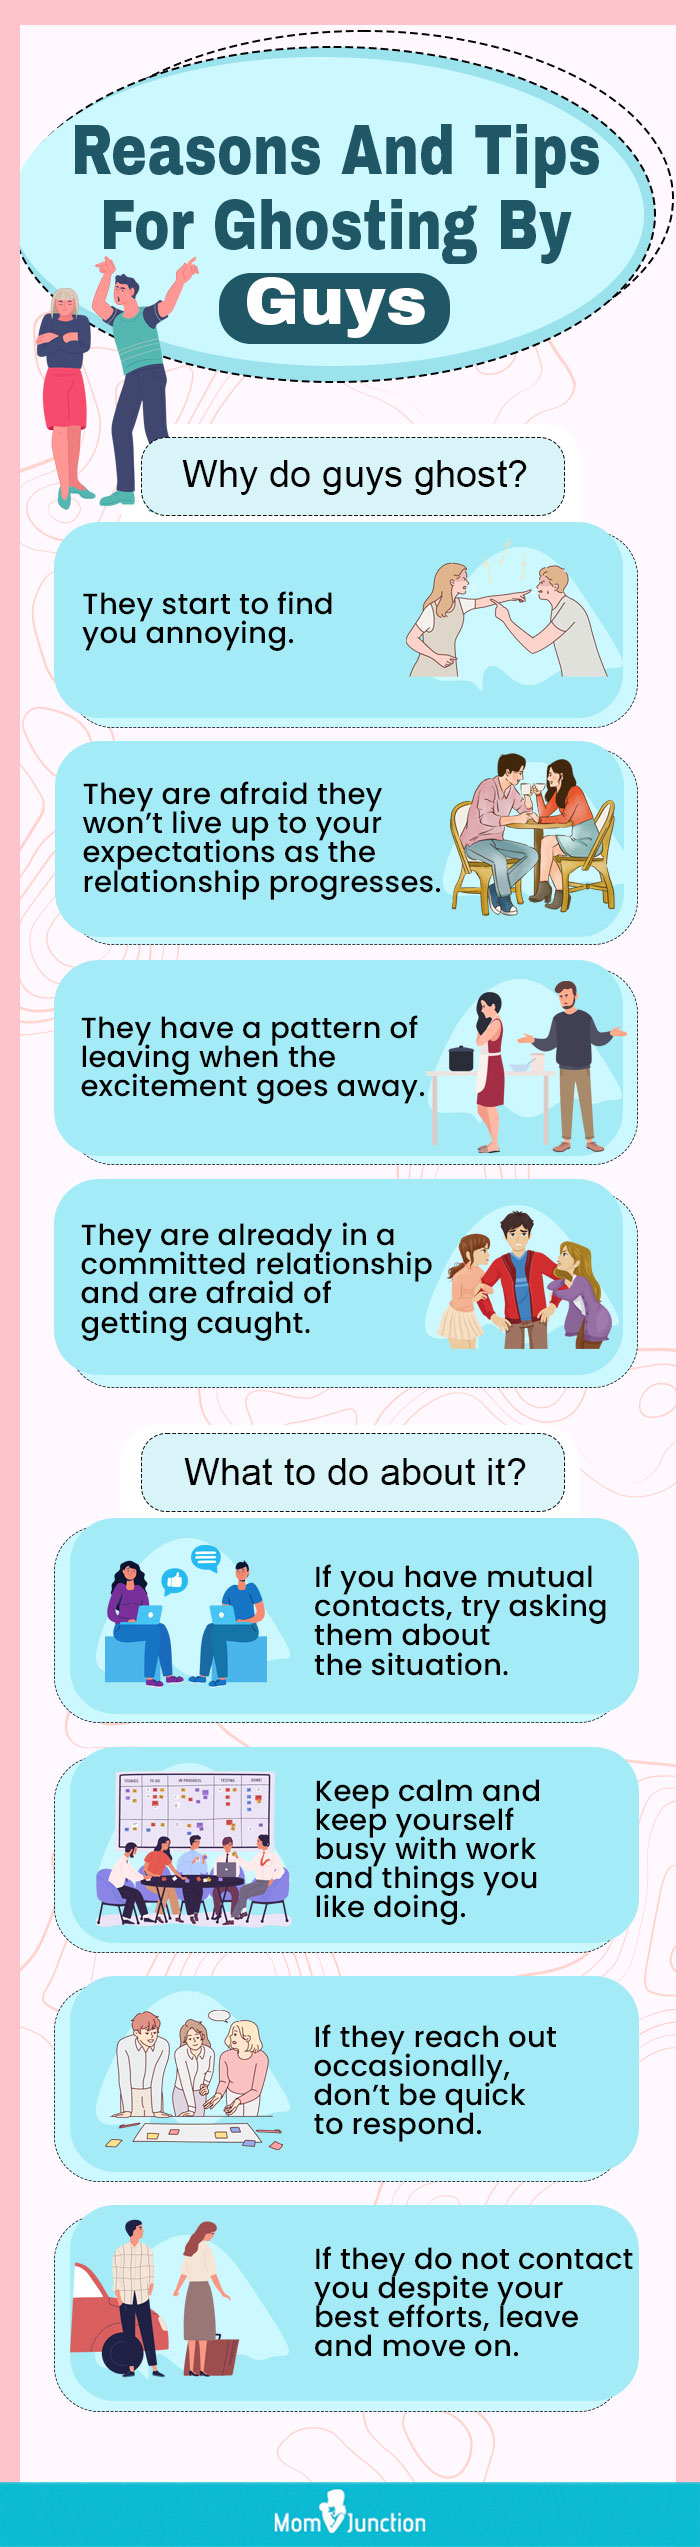 why men ghost women to help you get closure and tips (infographic)